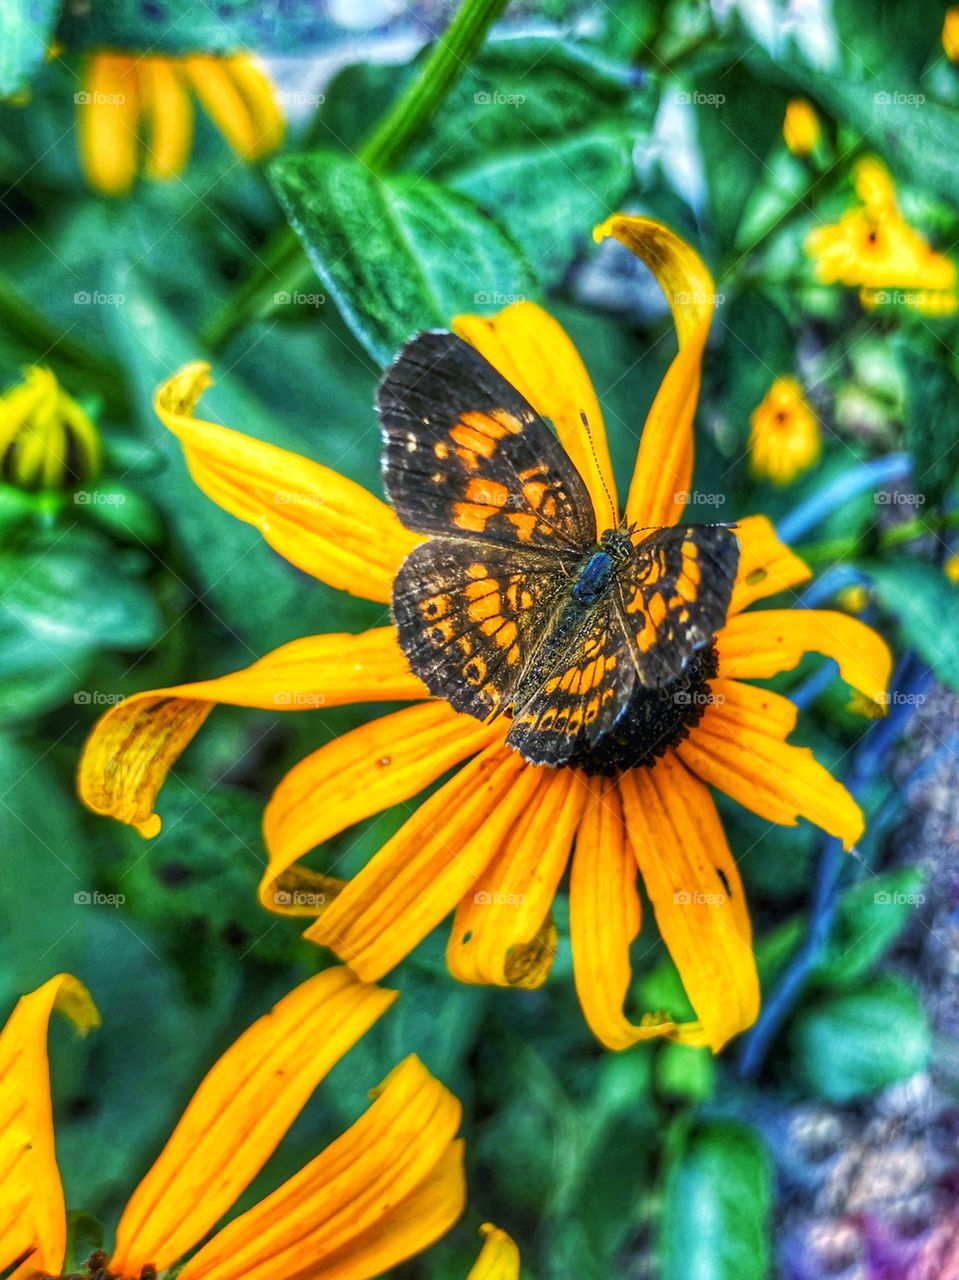 Black eyed Susan’s and butterfly 